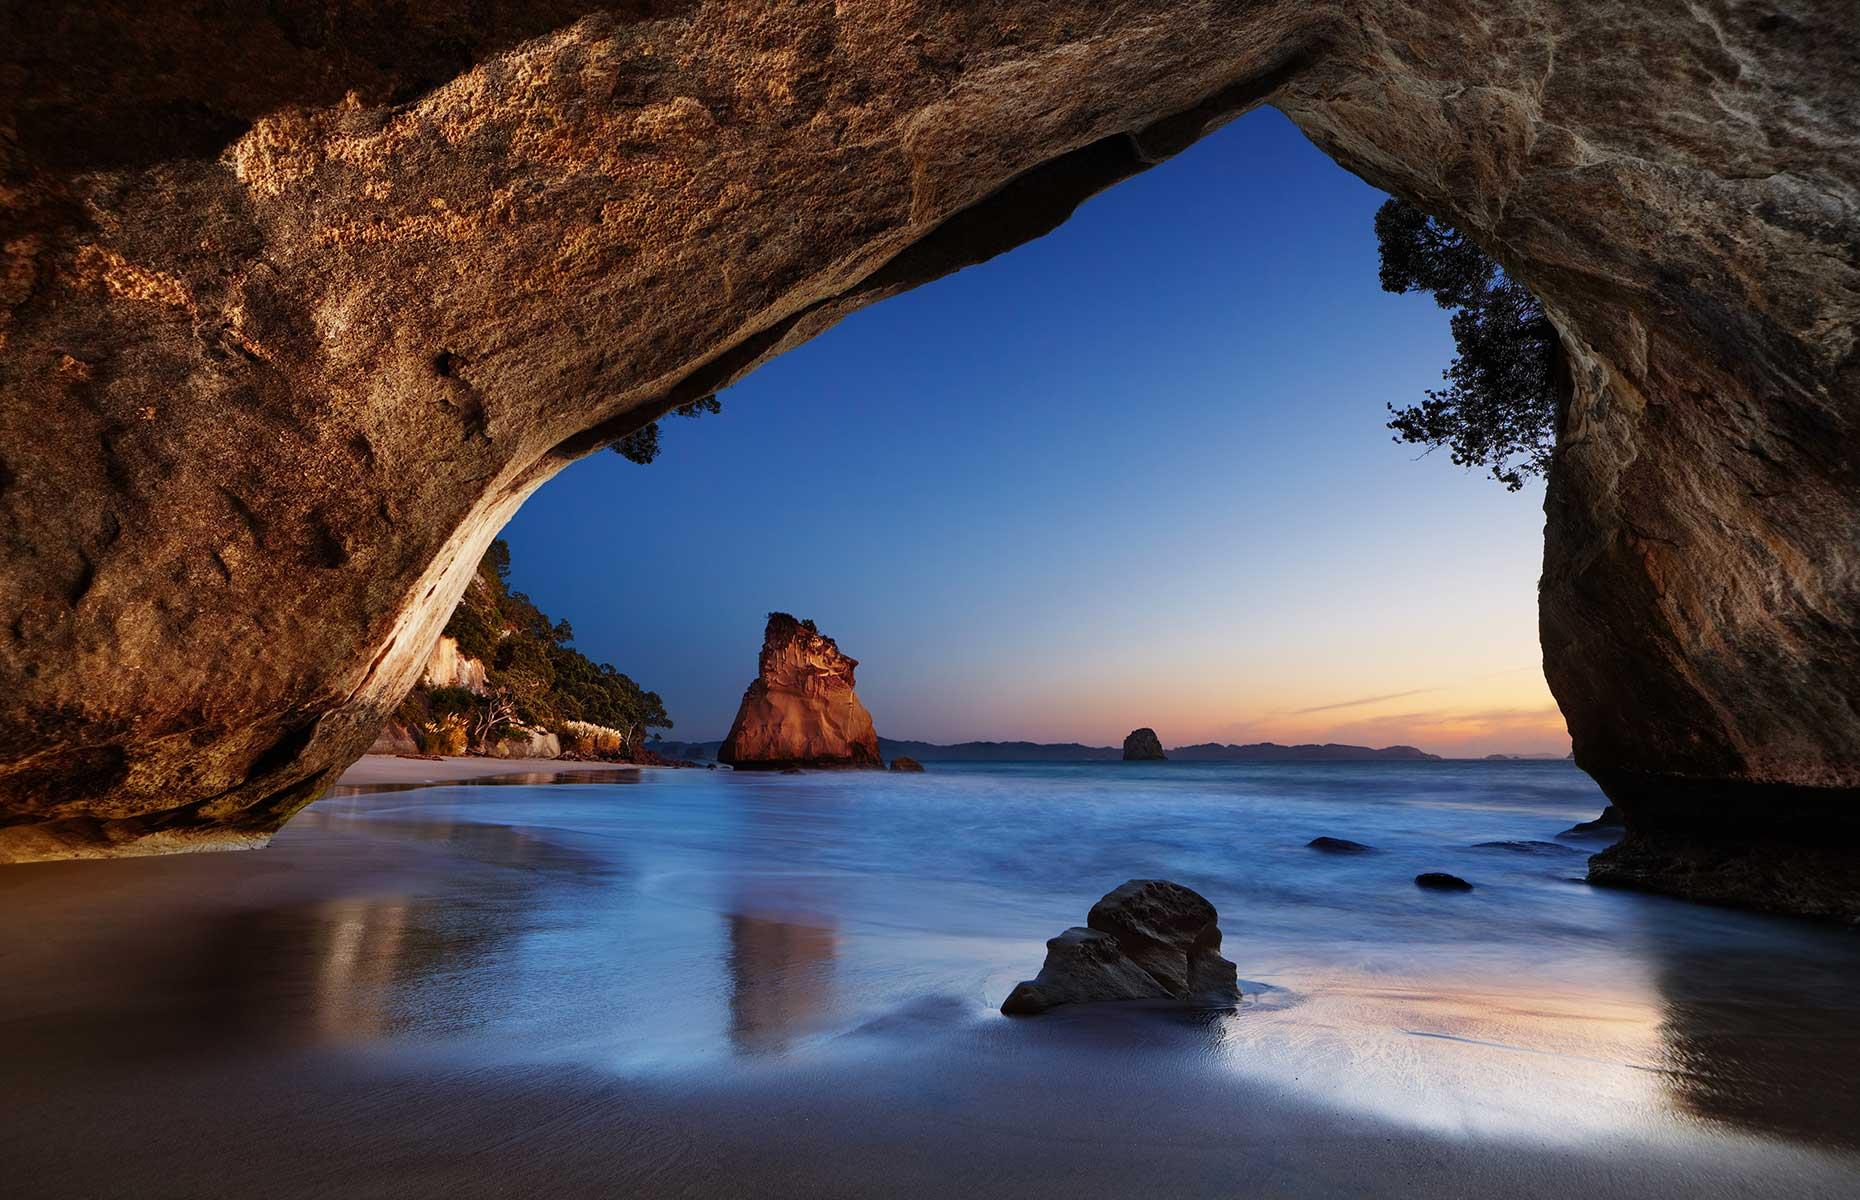 The Coromandel’s secluded Cathedral Cove is picture-perfect, framing a stand-alone rock that rises from the turquoise sea on the east coast of the North Island. For a different perspective (and to avoid the summer crowds) take the 'viewing platform' detour, a mile-long (1.6km) loop that offers views down onto the rock.